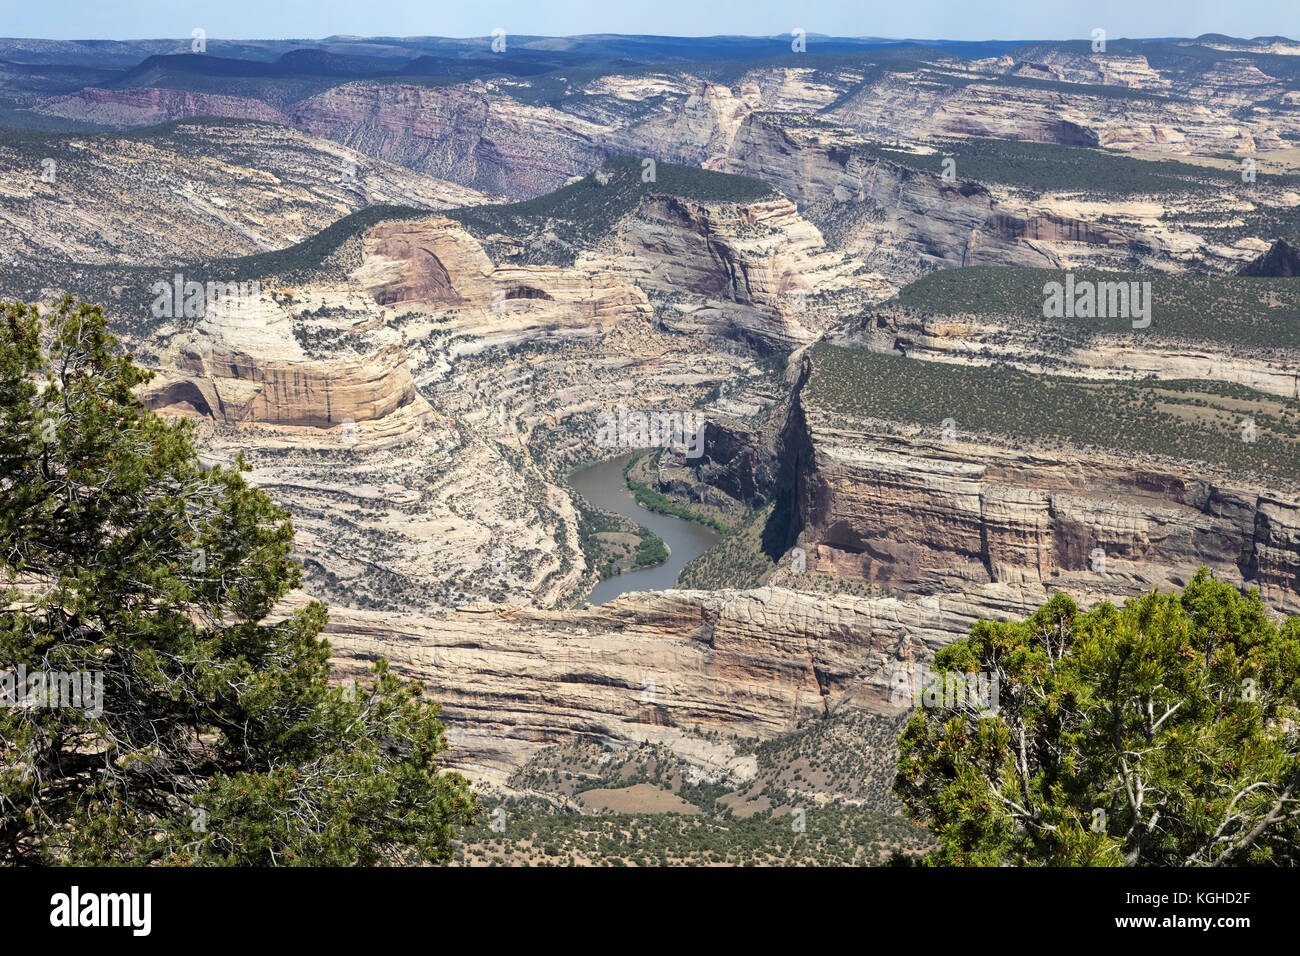 Yampa River Cutting through Geology of Dinosaur National Monument, Colorado Stock Photo